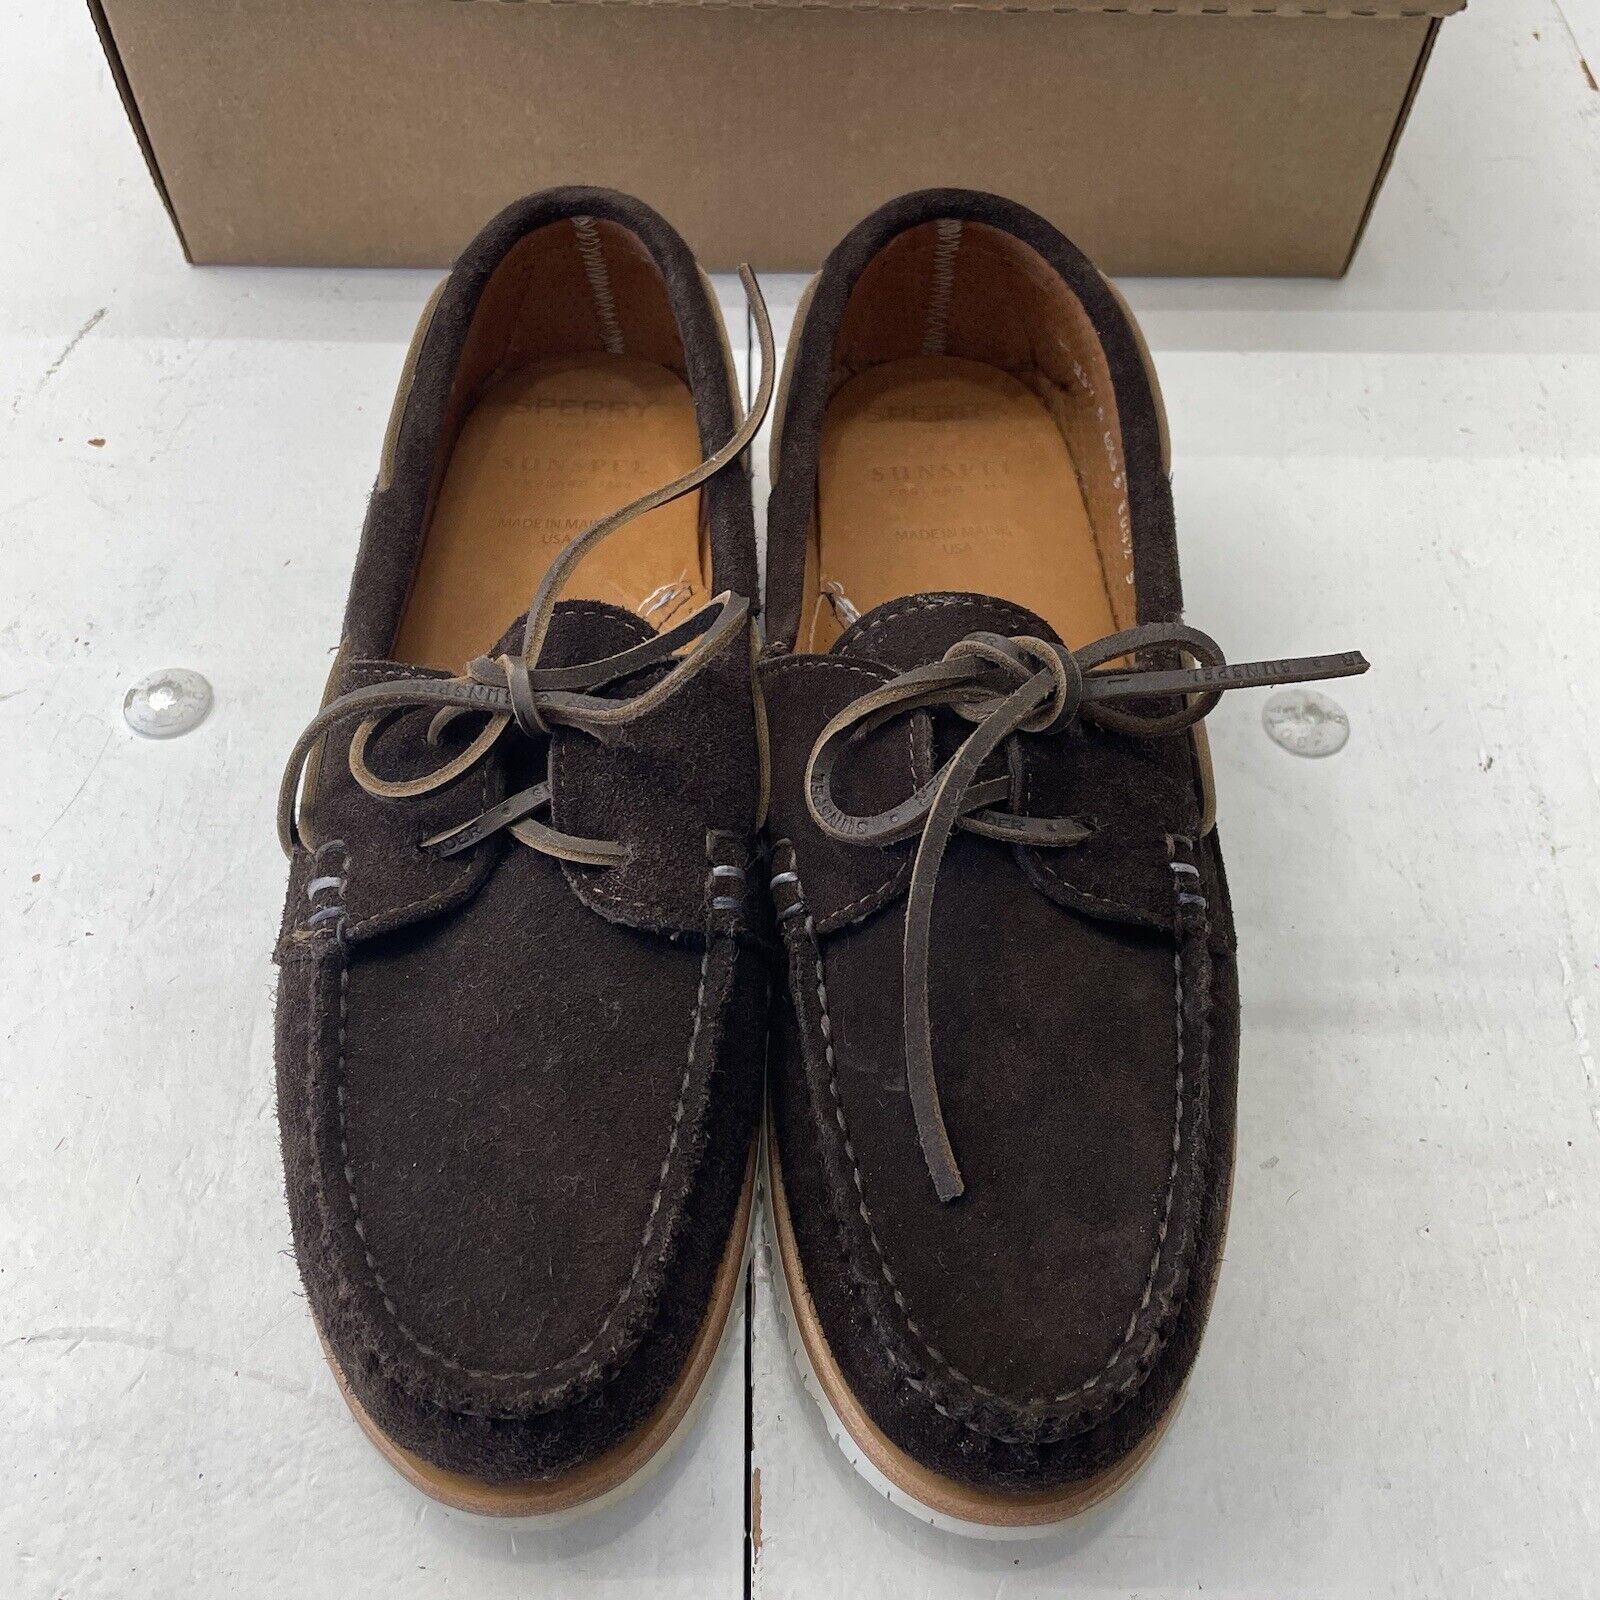 Sperry Top-Sider and Sunspel Brown Topsider Boat Shoes Suede Mens